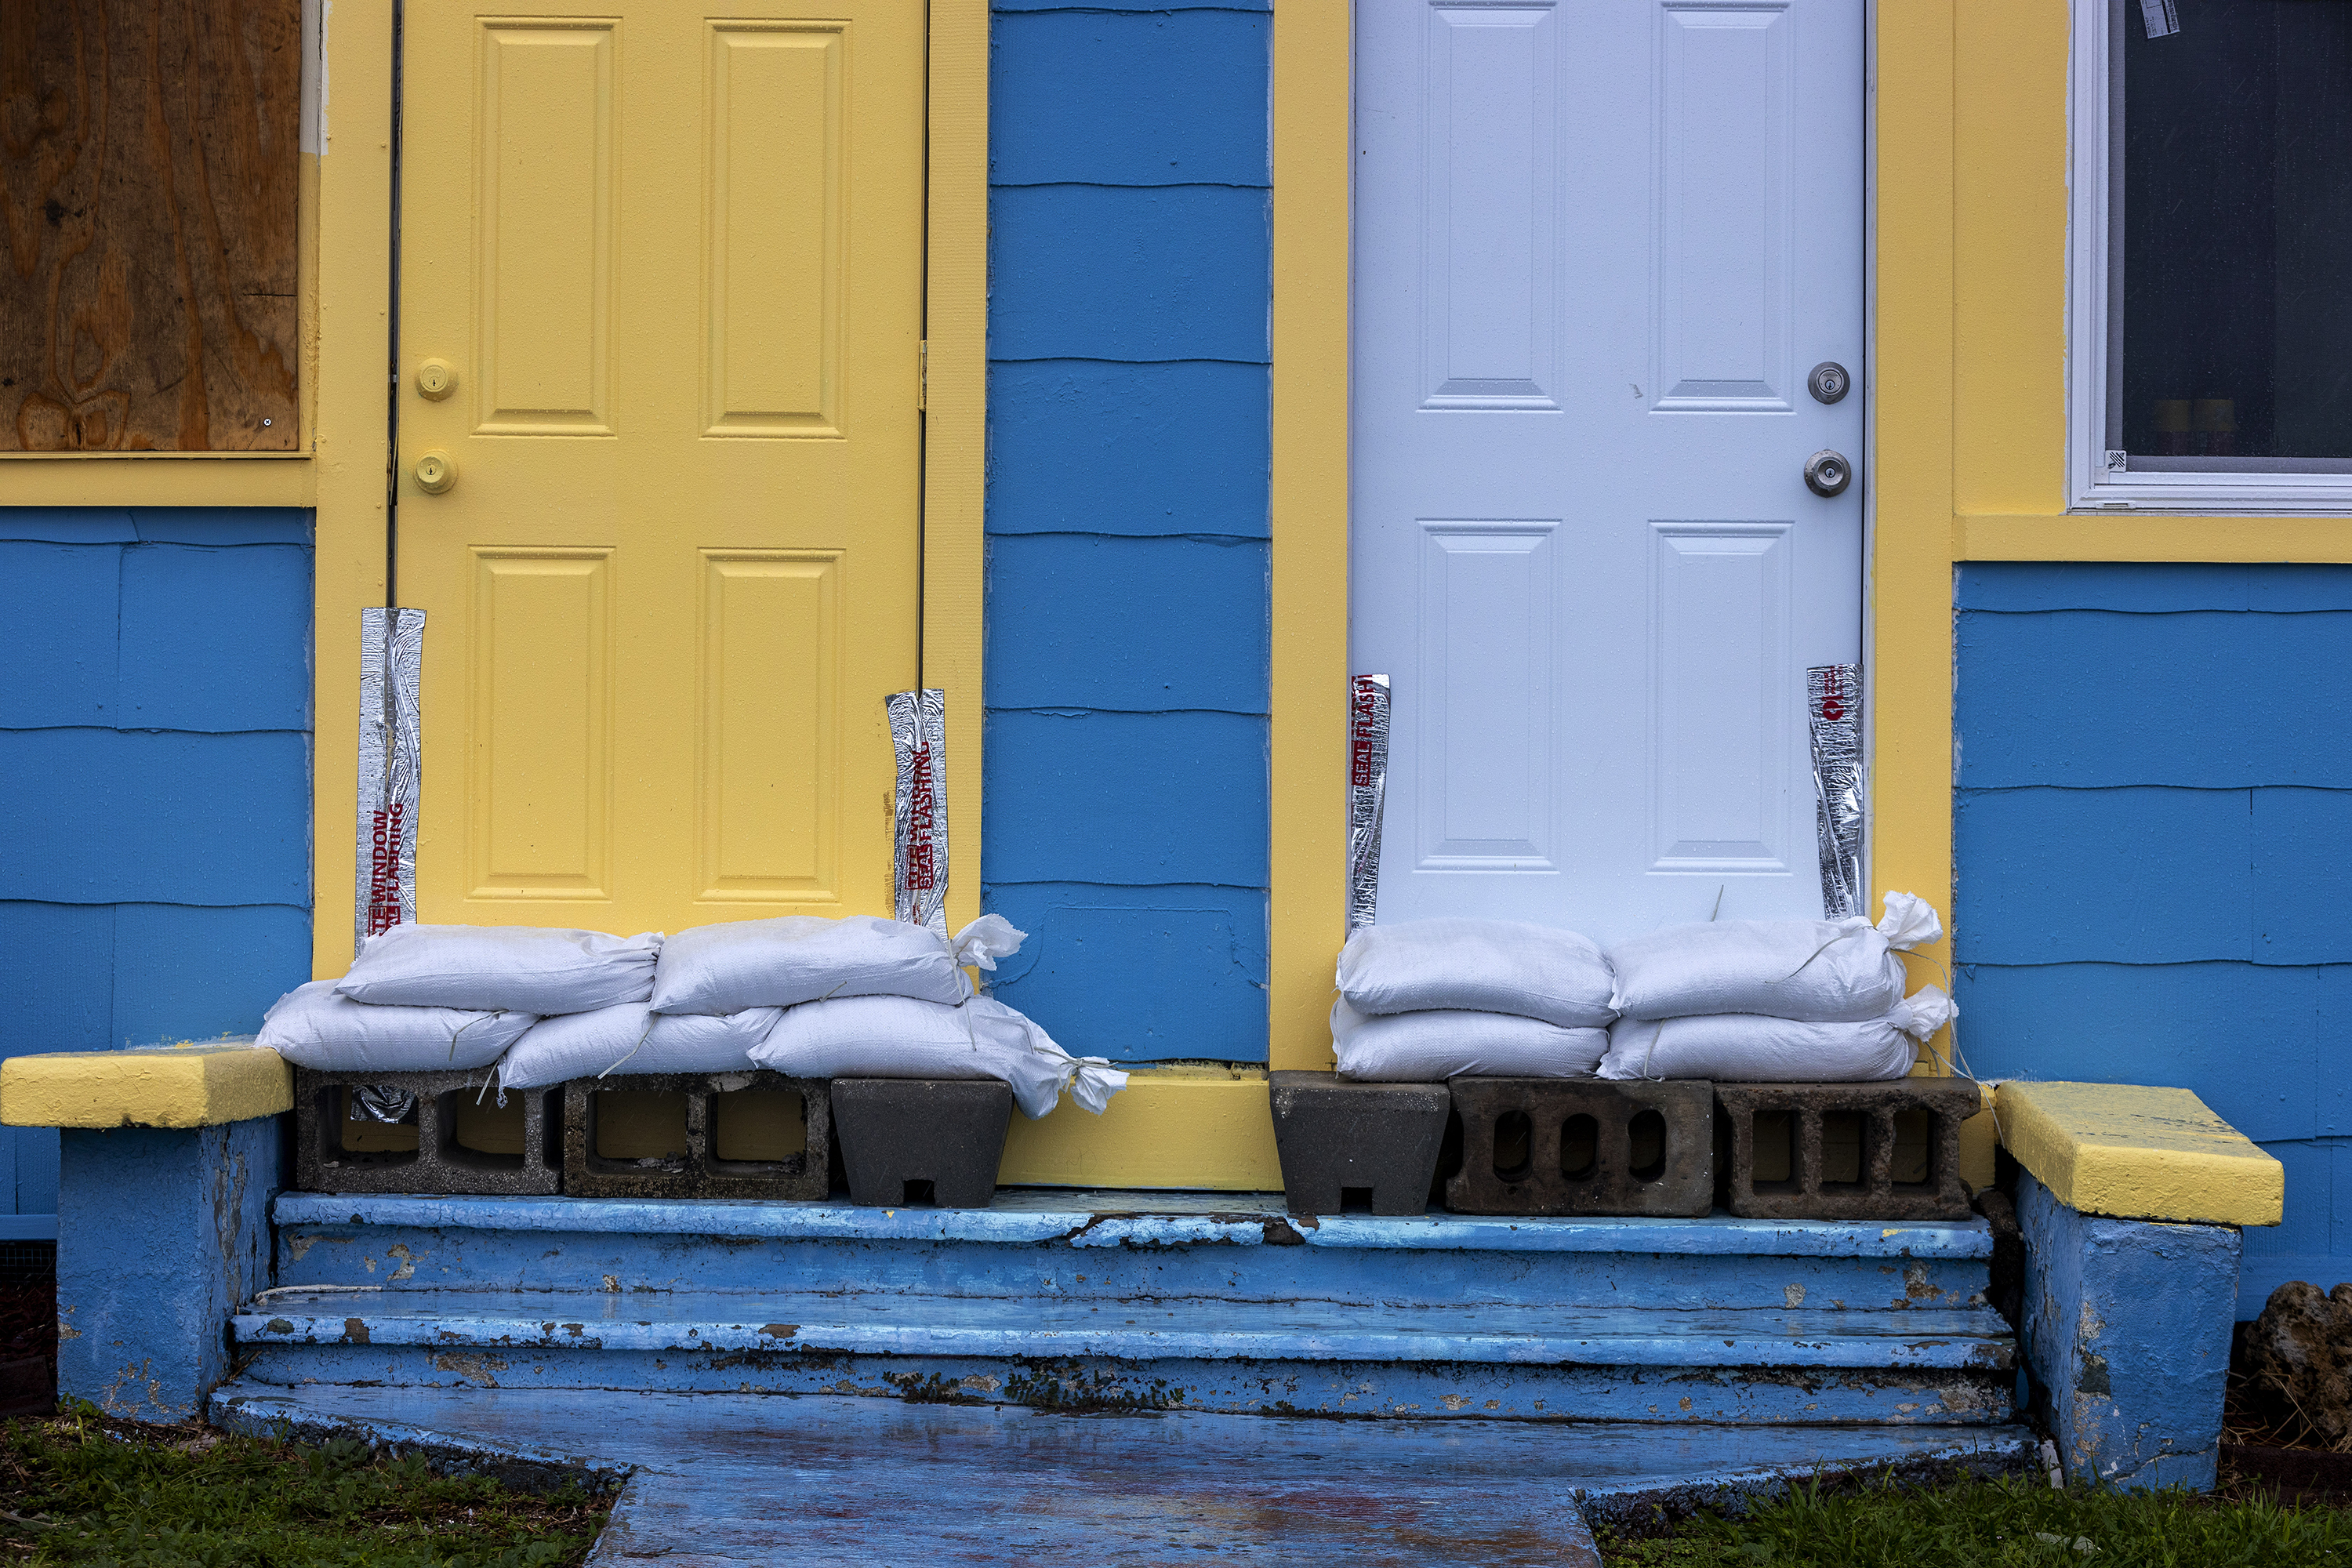 Sandbags in front of a house ahead of Hurricane Idalia in St. Petersburg, Florida, on August 29.